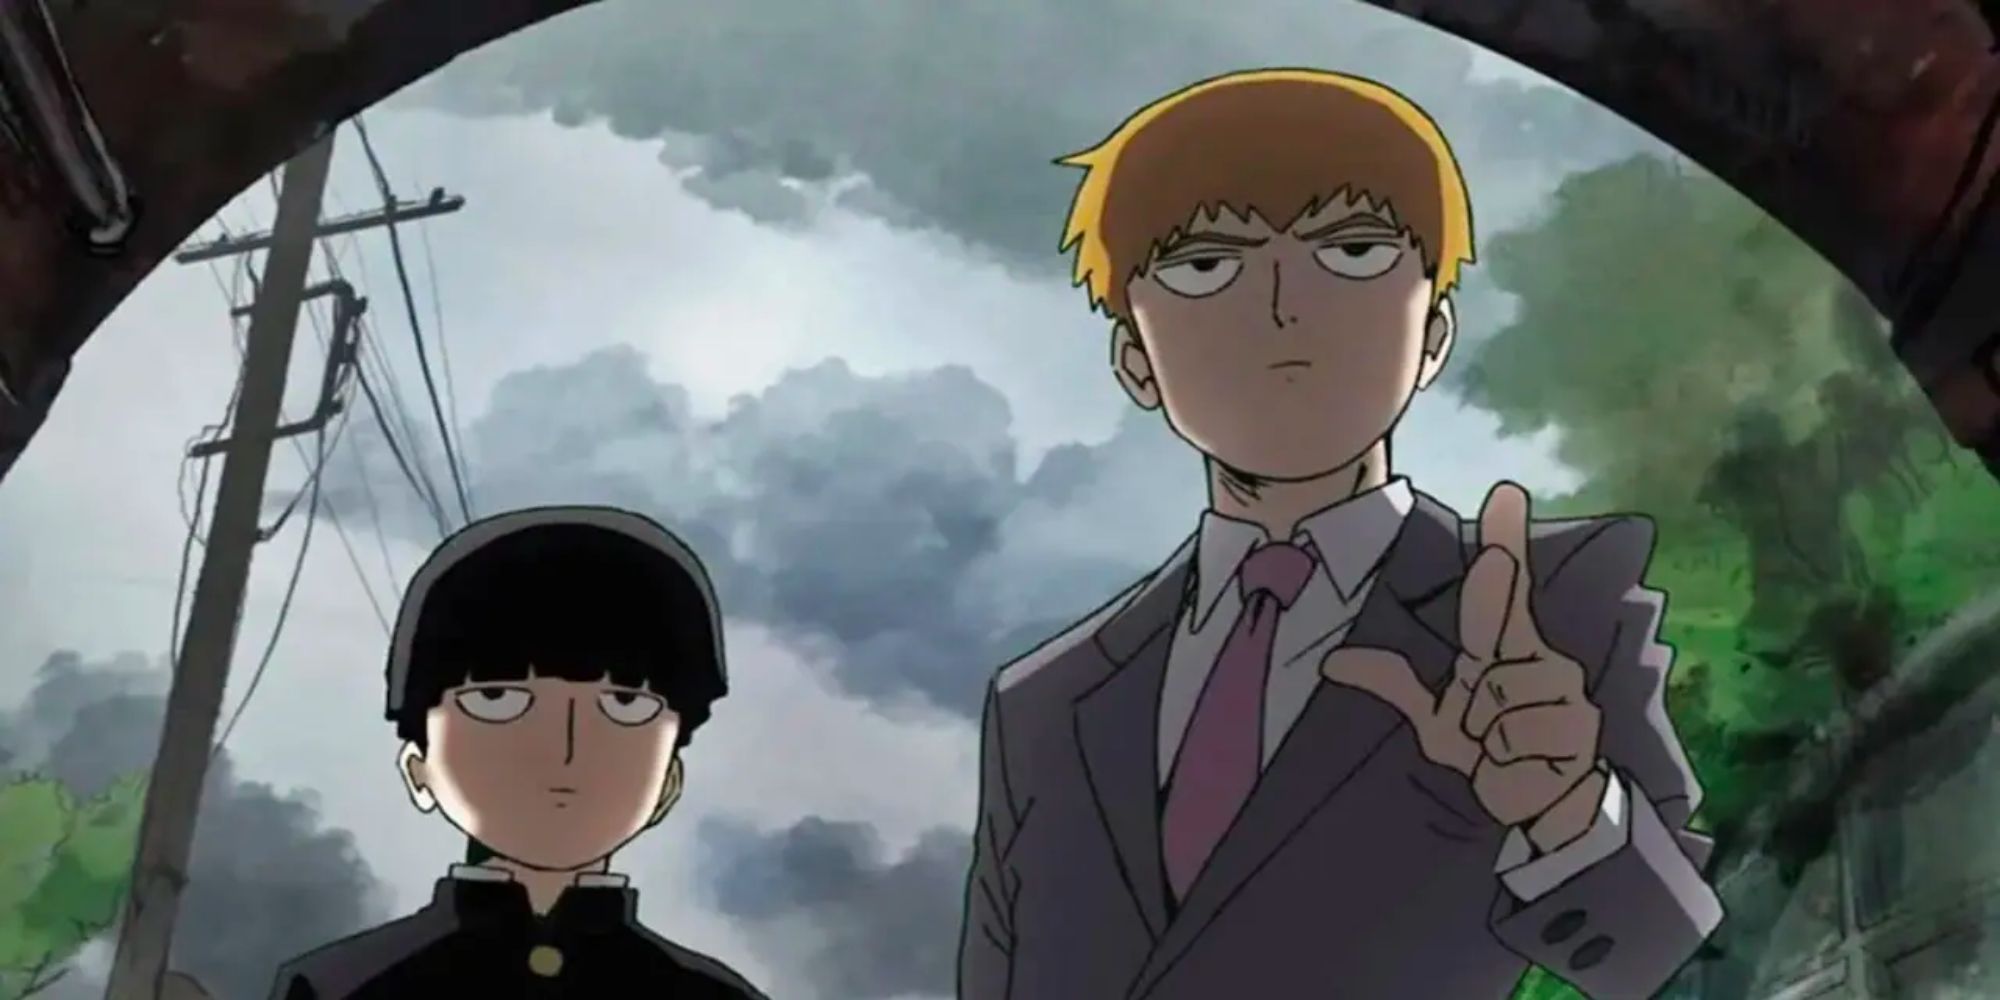 Mob Psycho 100 Creator Readies Reigen for Fall With New Sketch